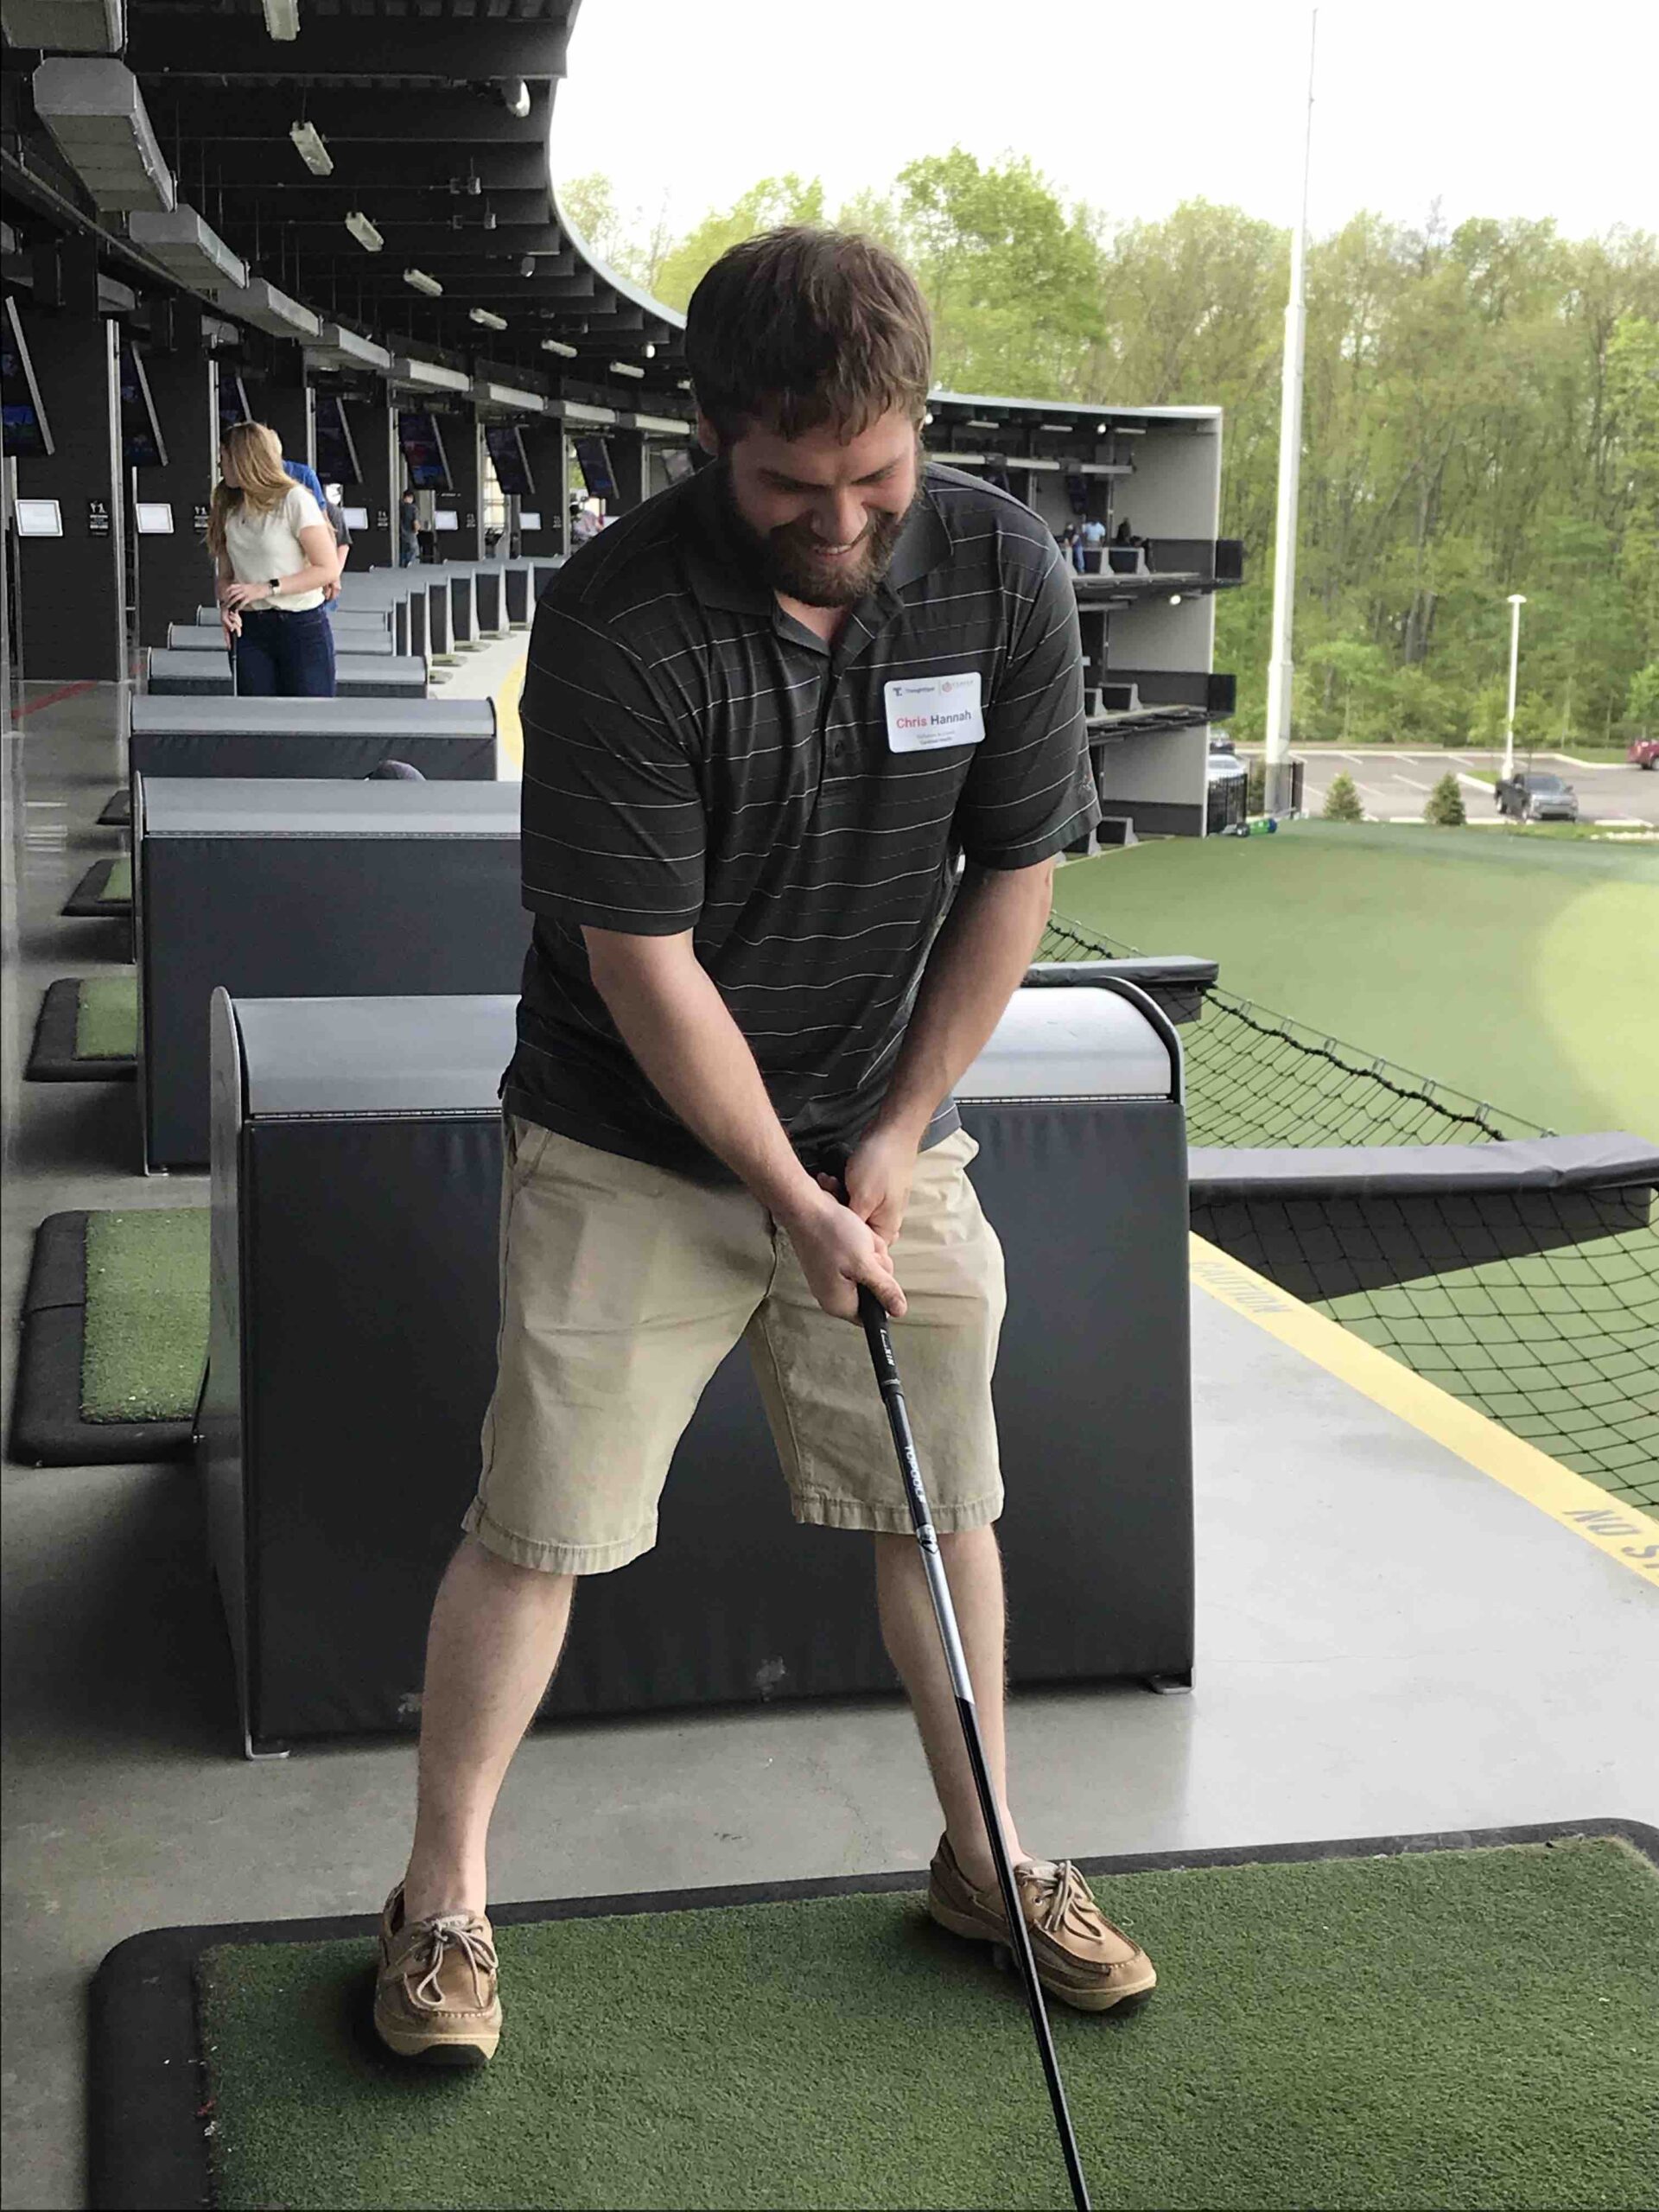 top data analytics companies ohio hosts golf event with expeed software